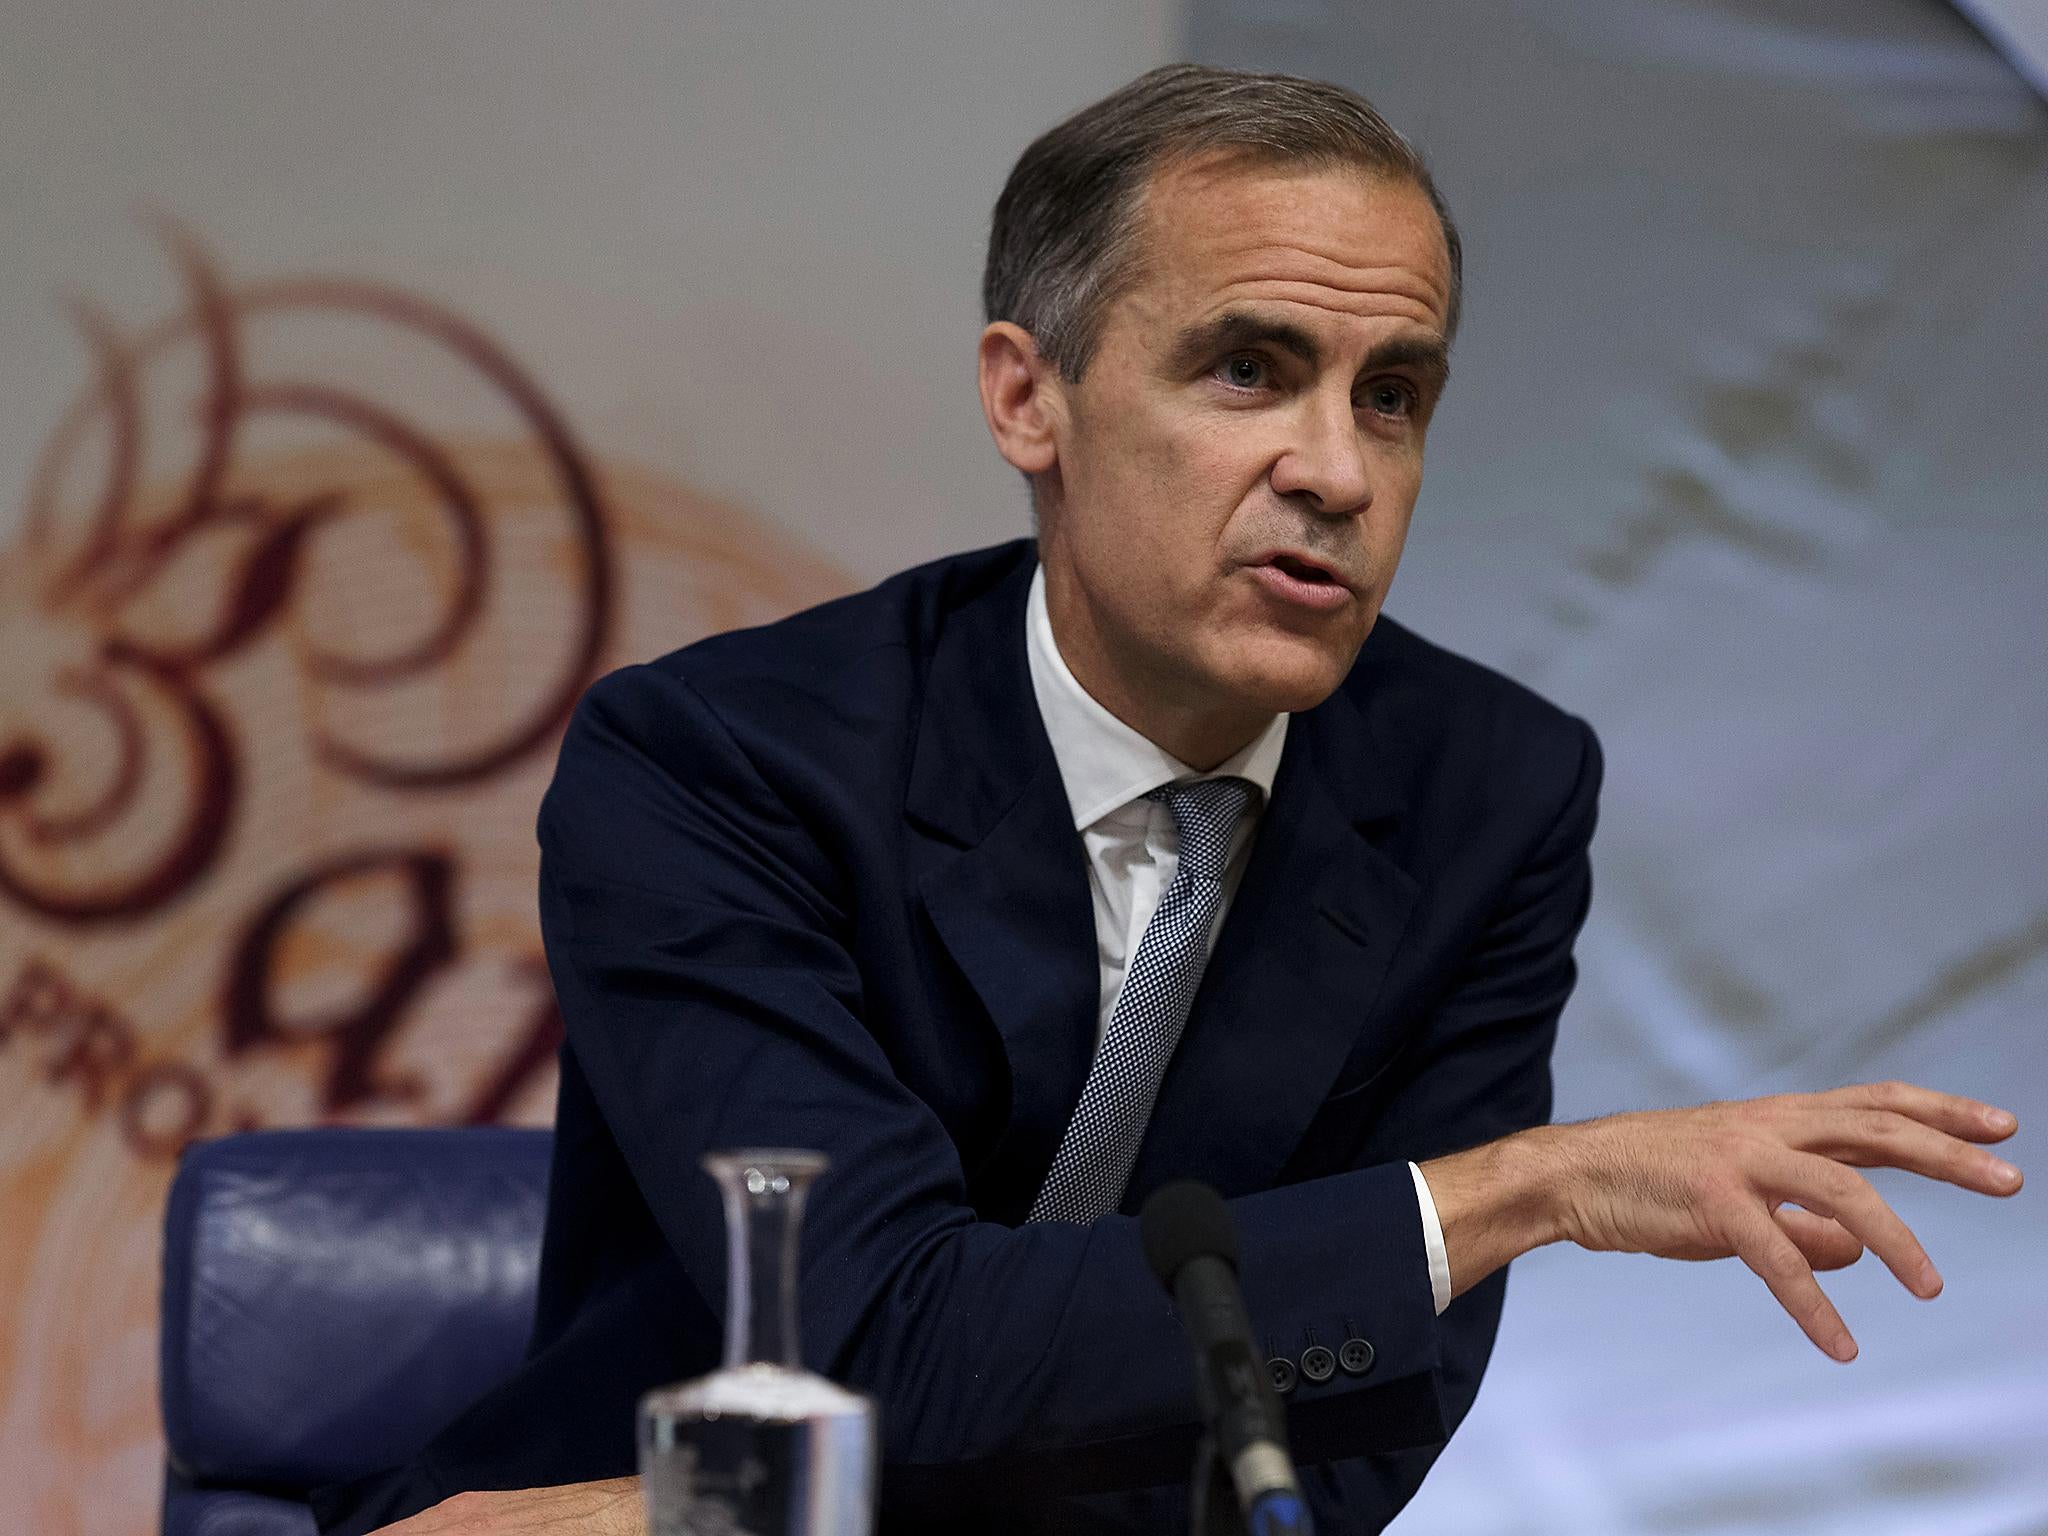 Mark Carney has echoed the sentiments of many businesses who are calling for a clear plan